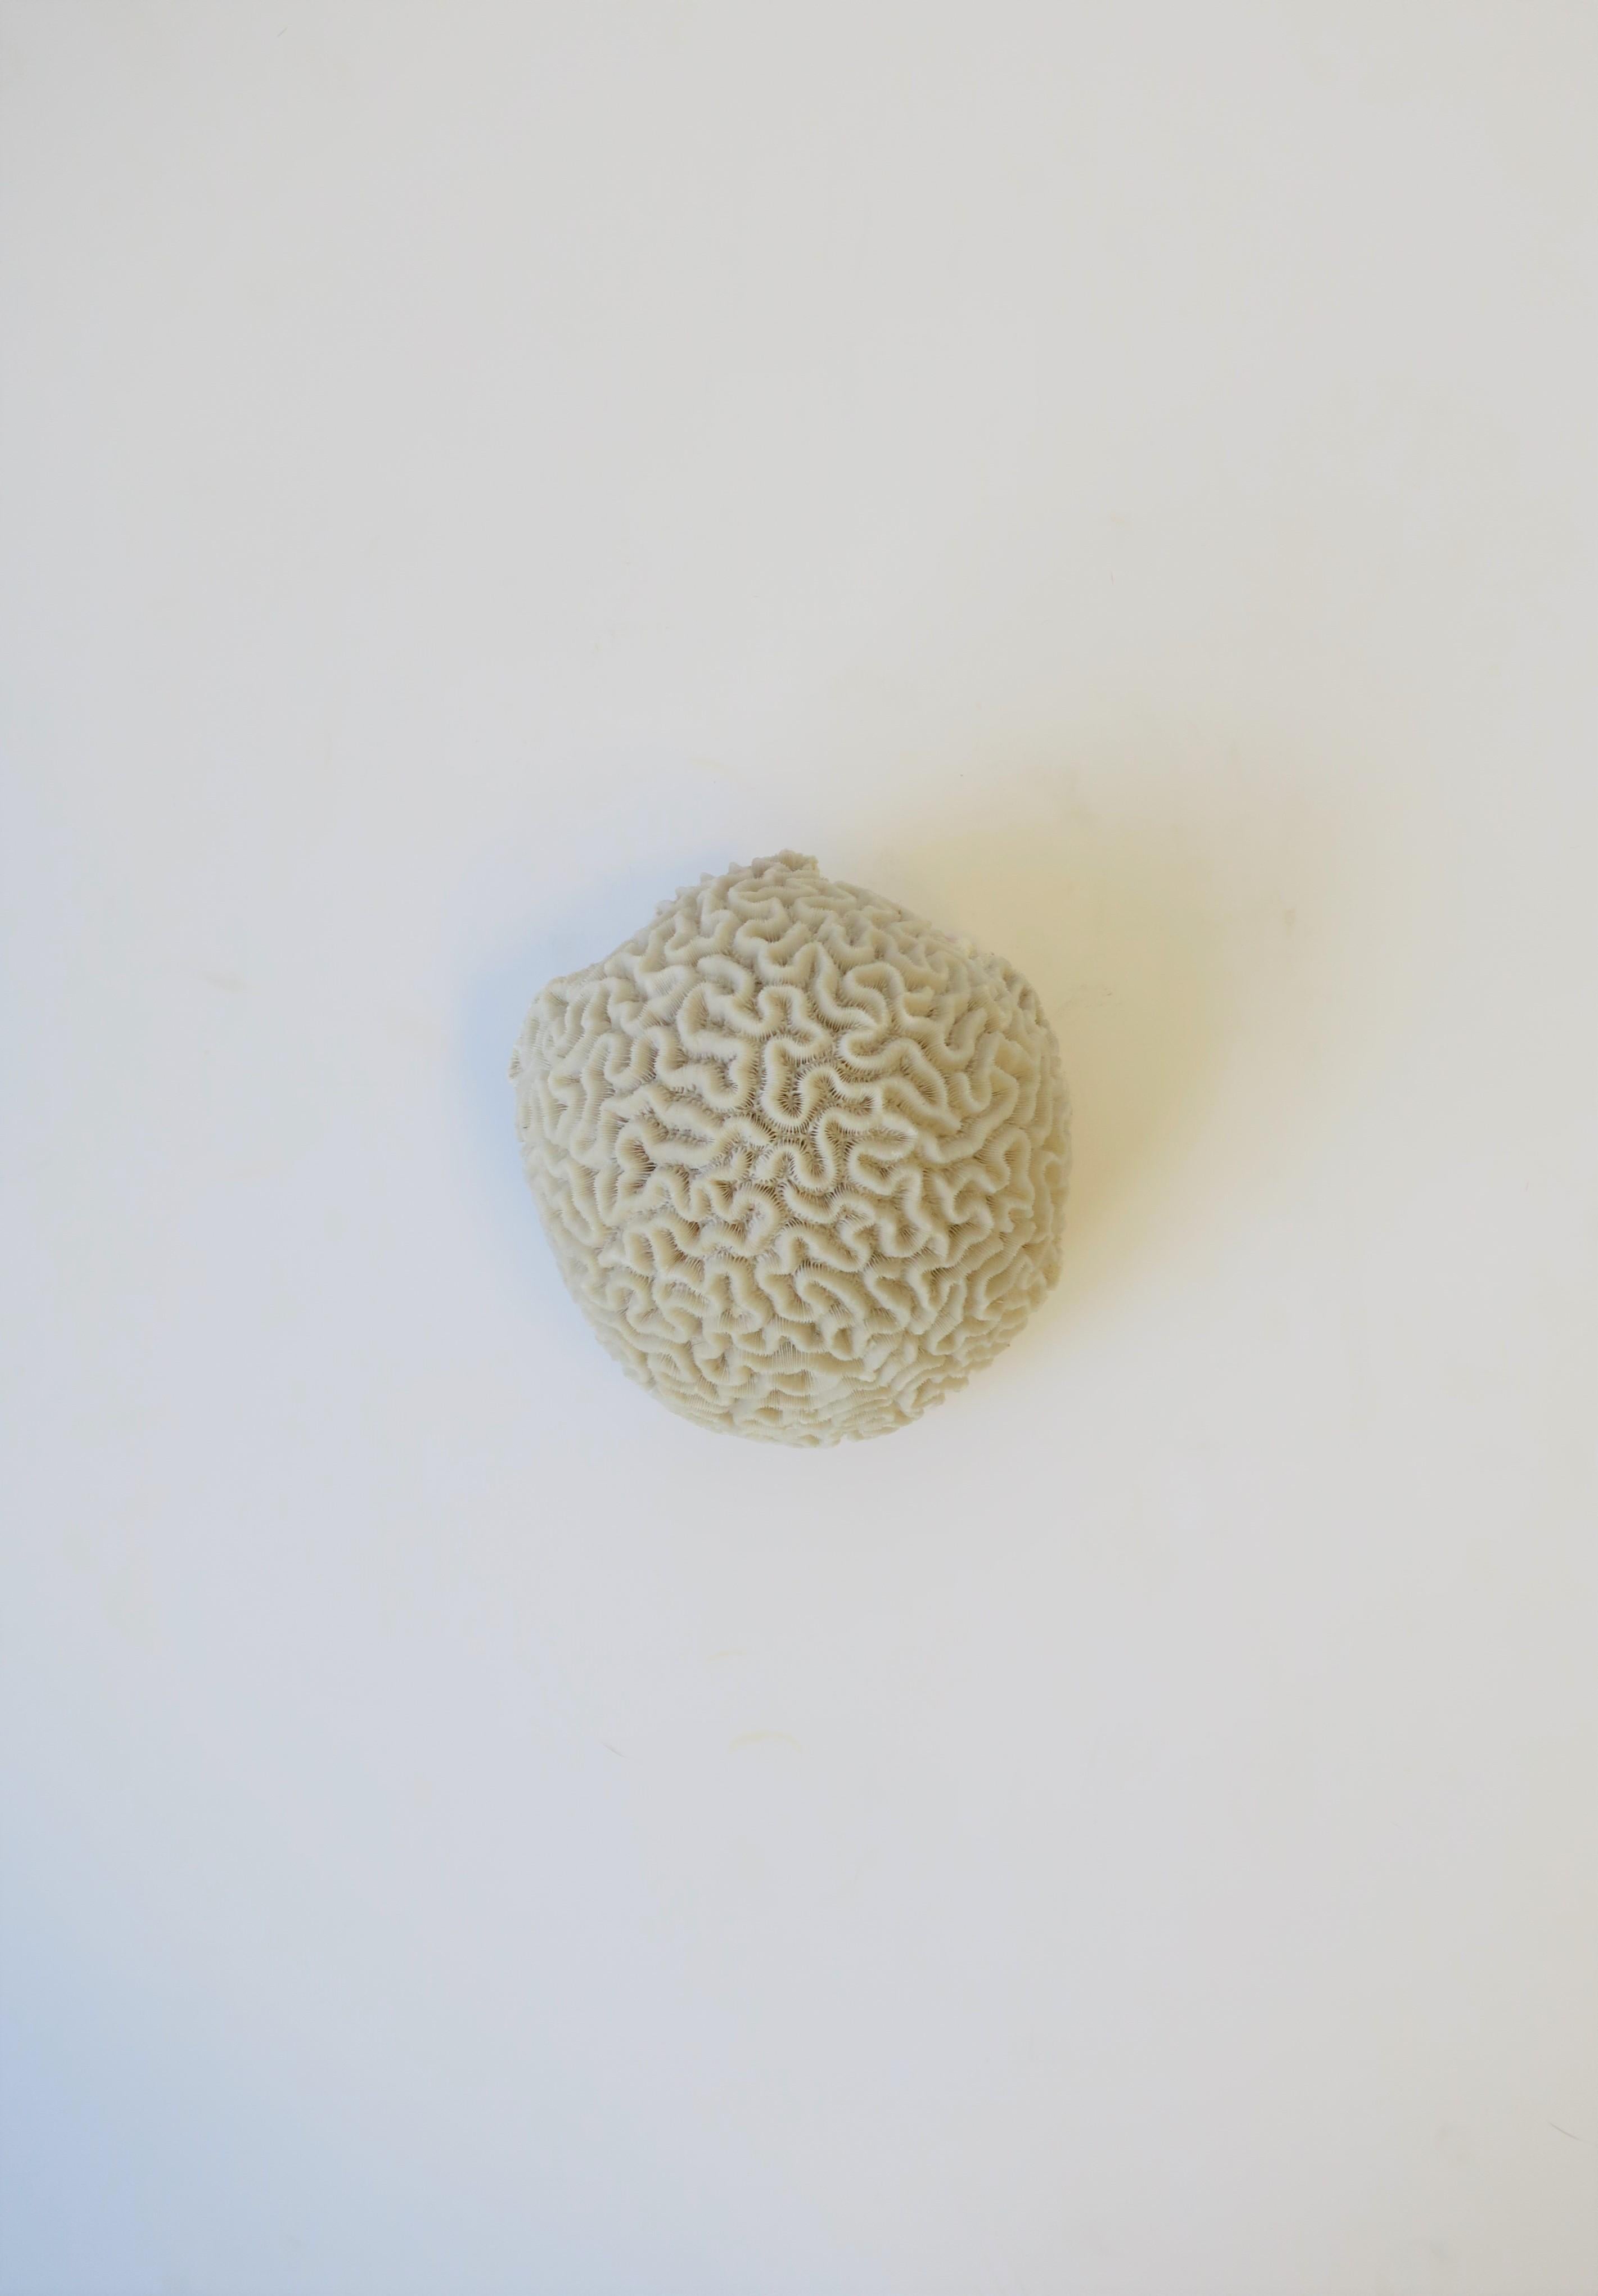 A beautiful fragment of natural white brain coral. Beautiful as a standalone decorative object, as a centerpiece, used with other seashells, or as a luxury item display piece. 

Measurements include: 5 in. W x 5.75 in. D x 3.25 in. H.

Shagreen